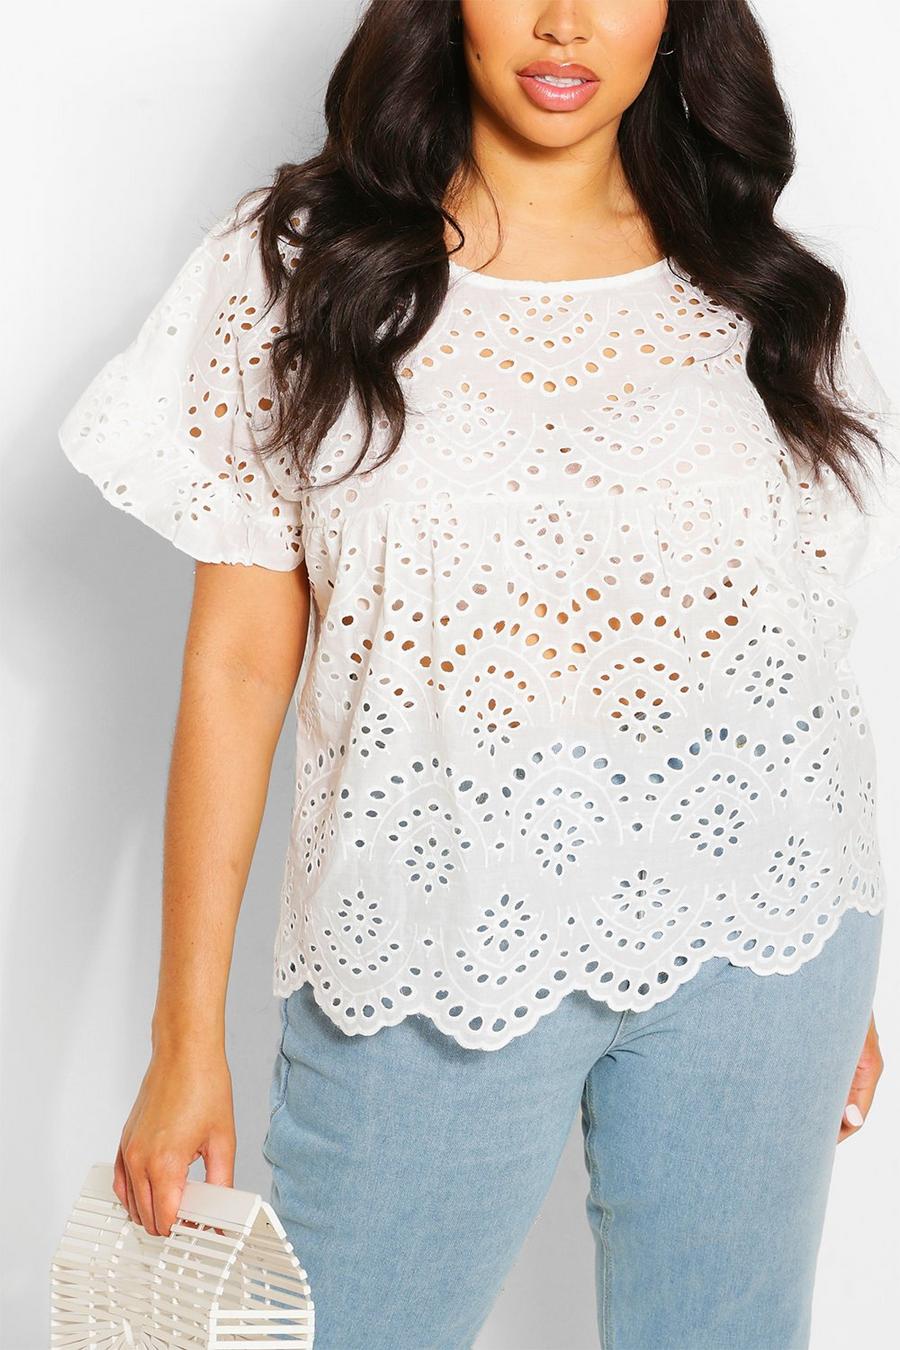 Grande taille - Top smocké à broderie anglaise, Blanc